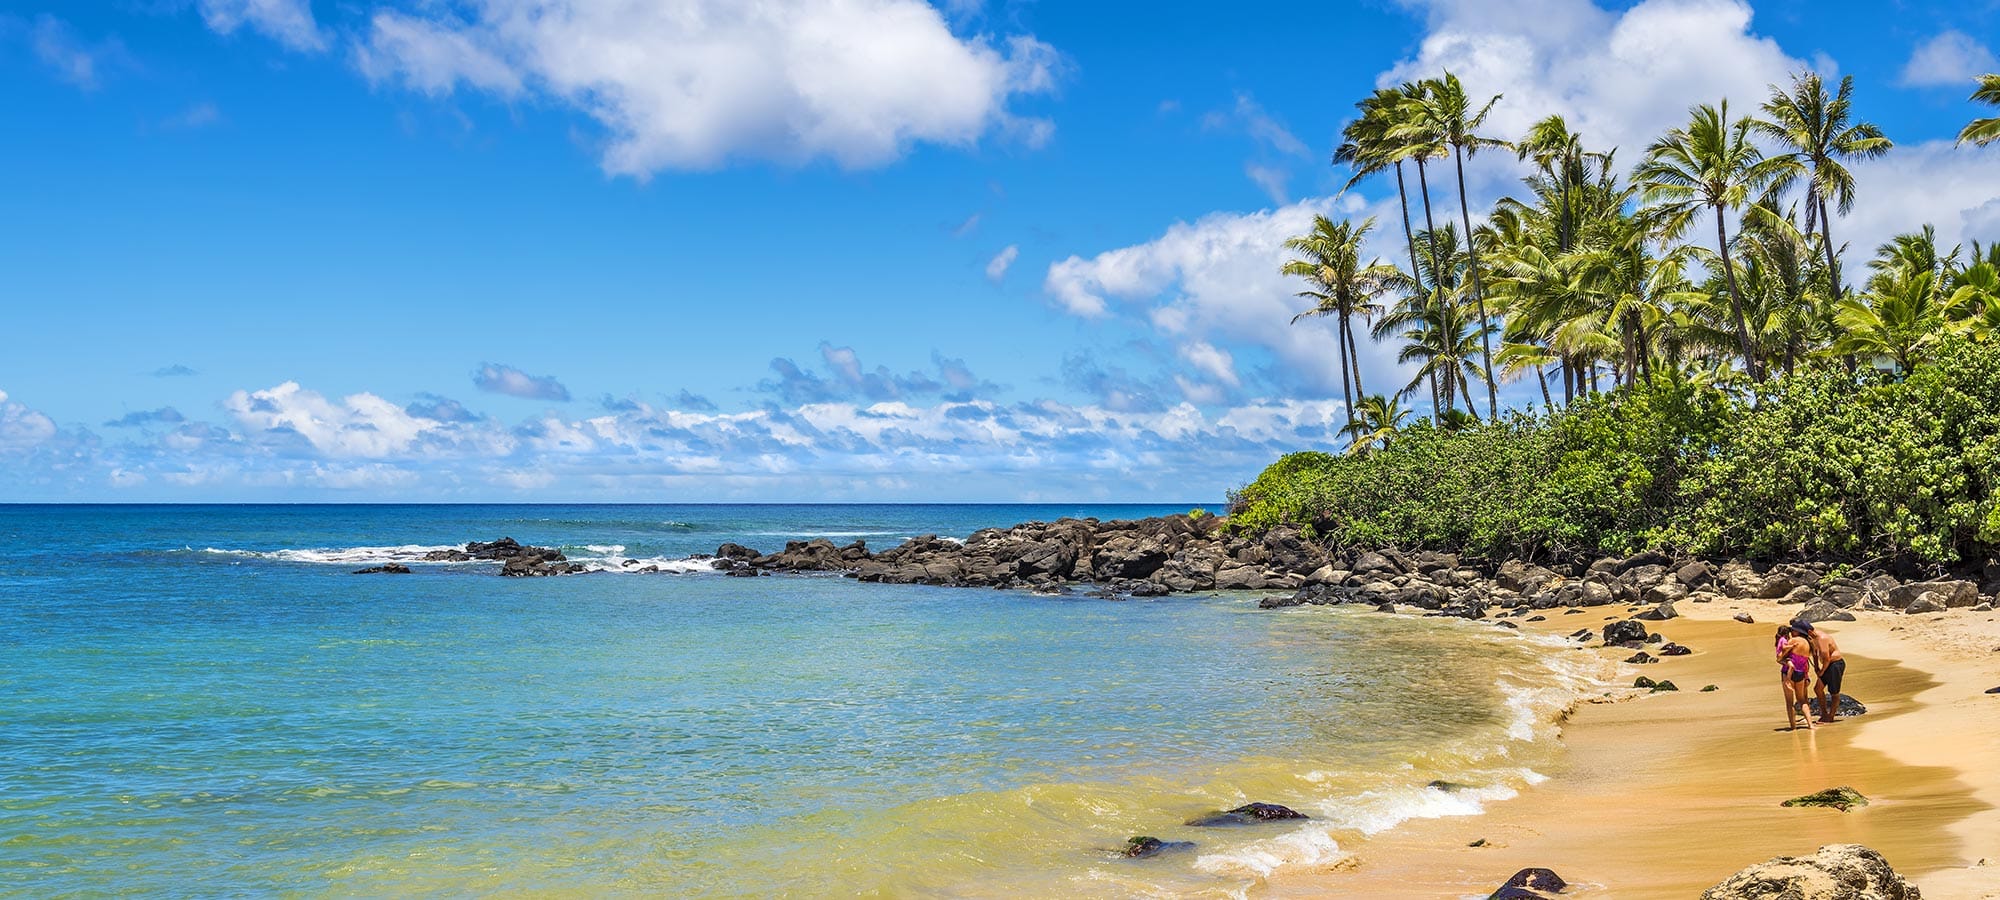 These airfare deals from major cities in California can make your Hawaiian getaway a reality this fall.